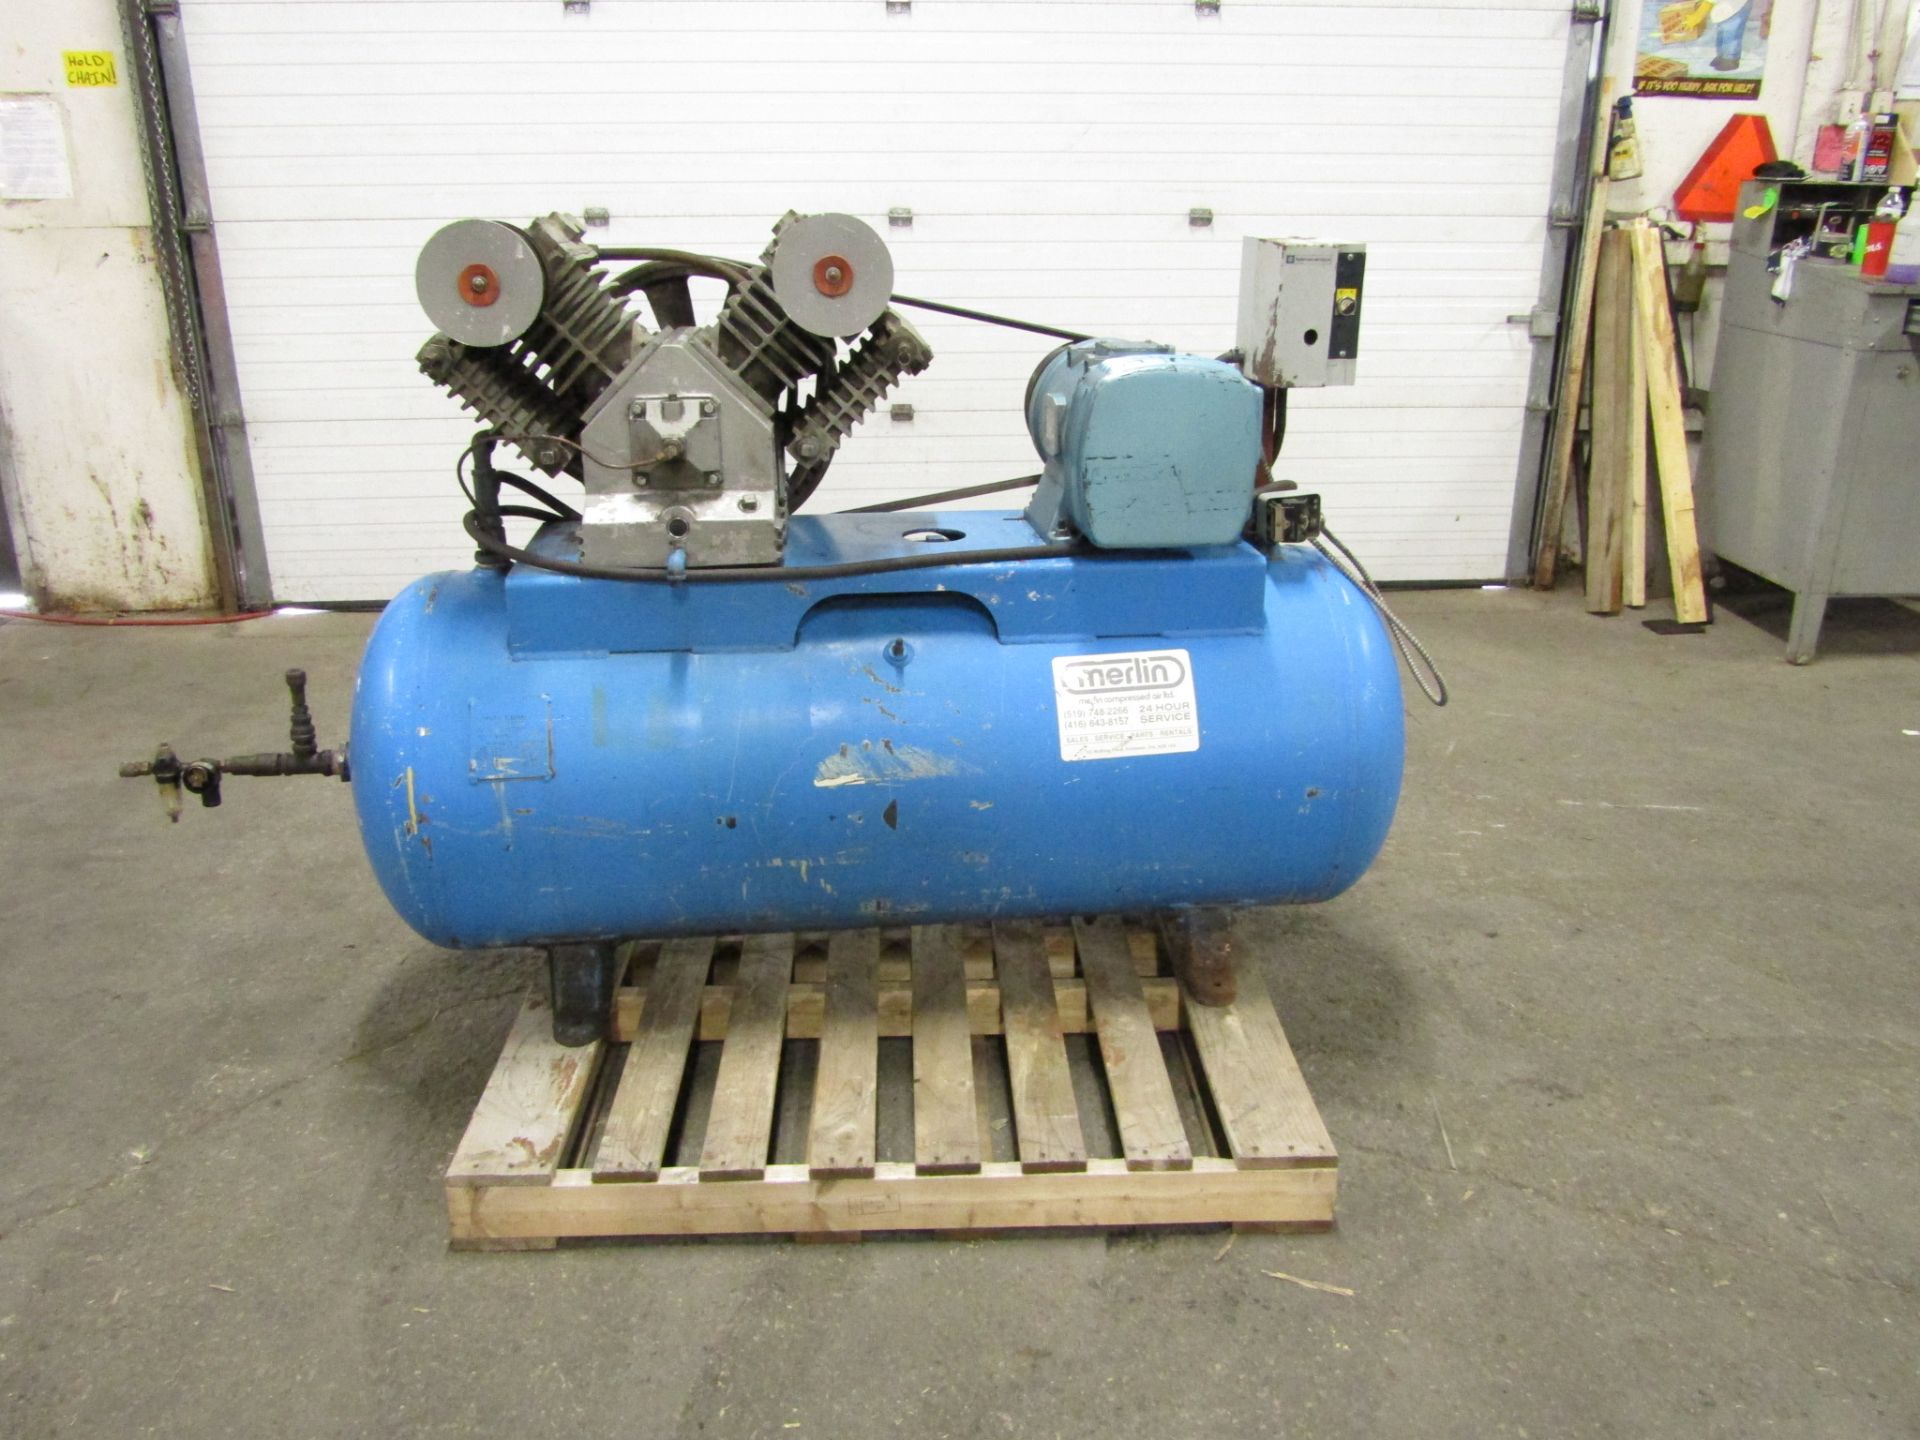 Merlin Air Compressor 15HP with 200 gallon tank